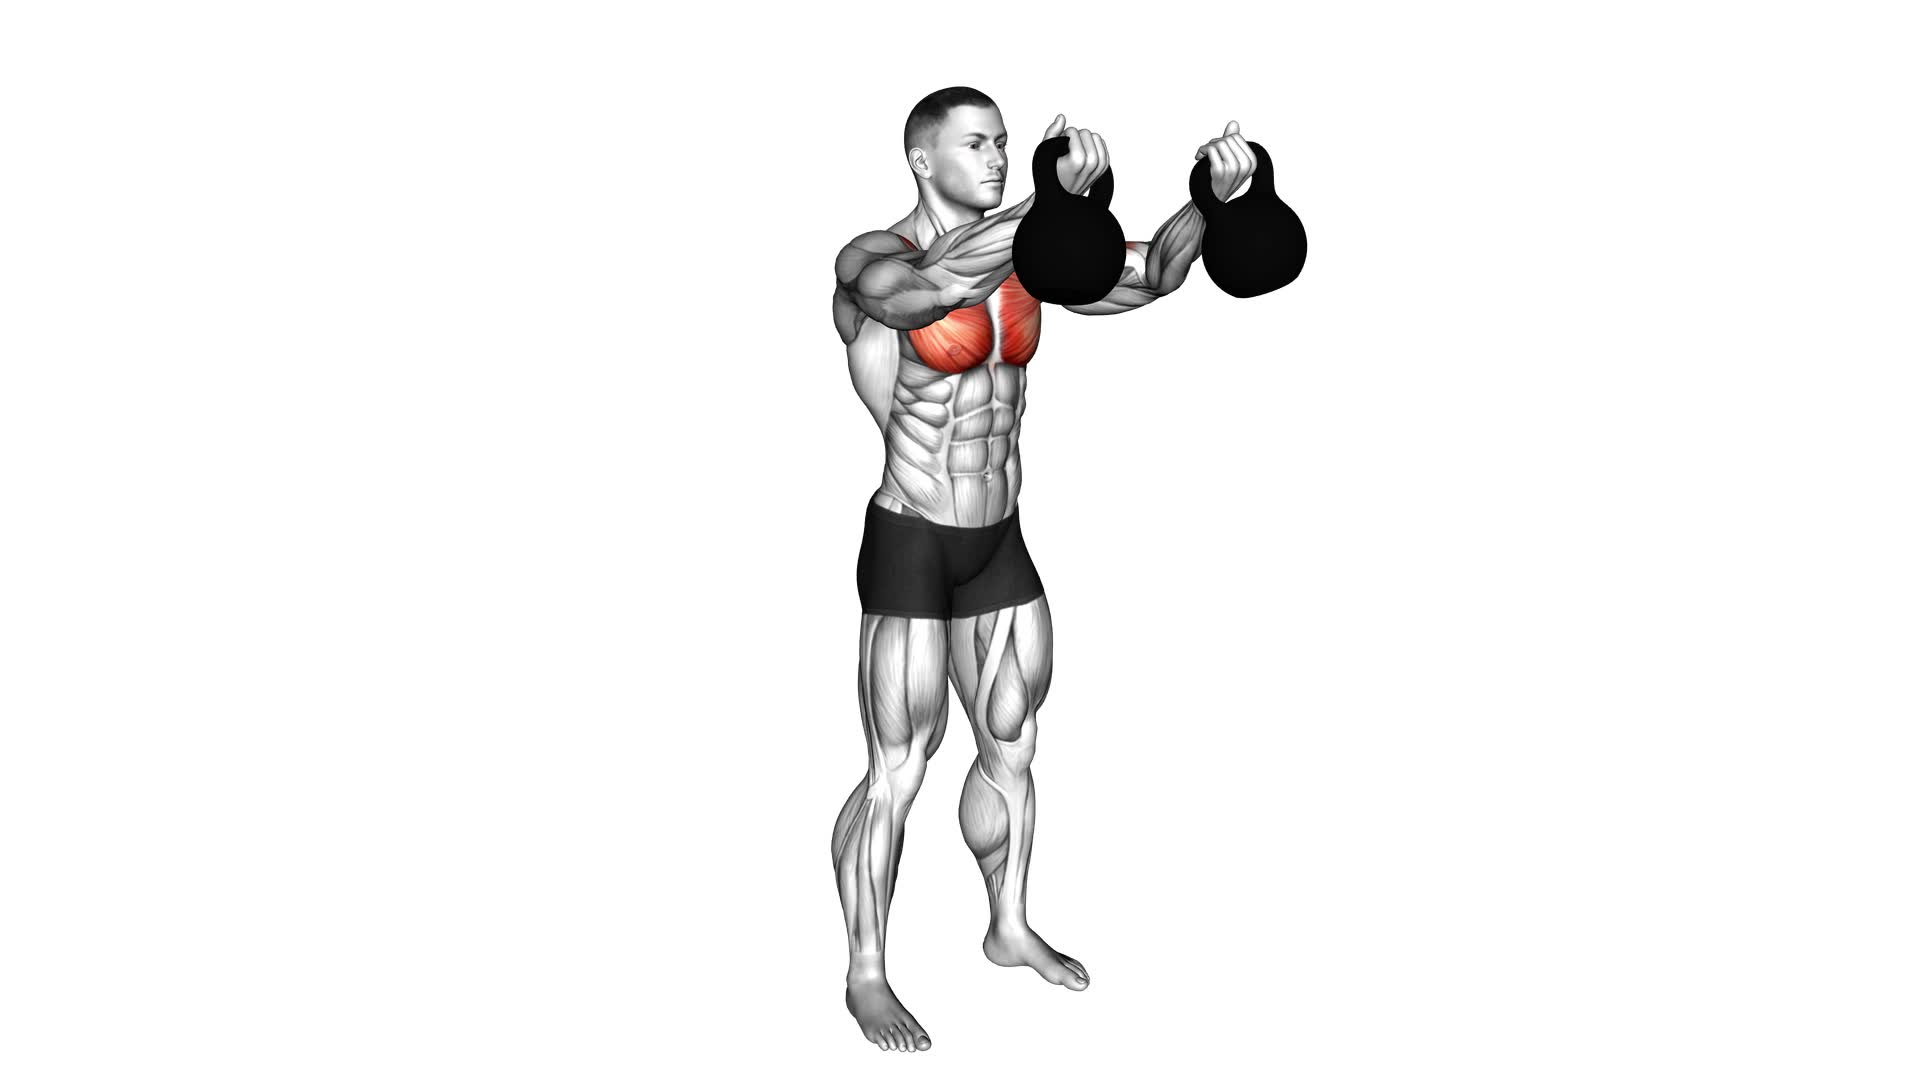 Kettlebell Low Fly (male) - Video Exercise Guide & Tips